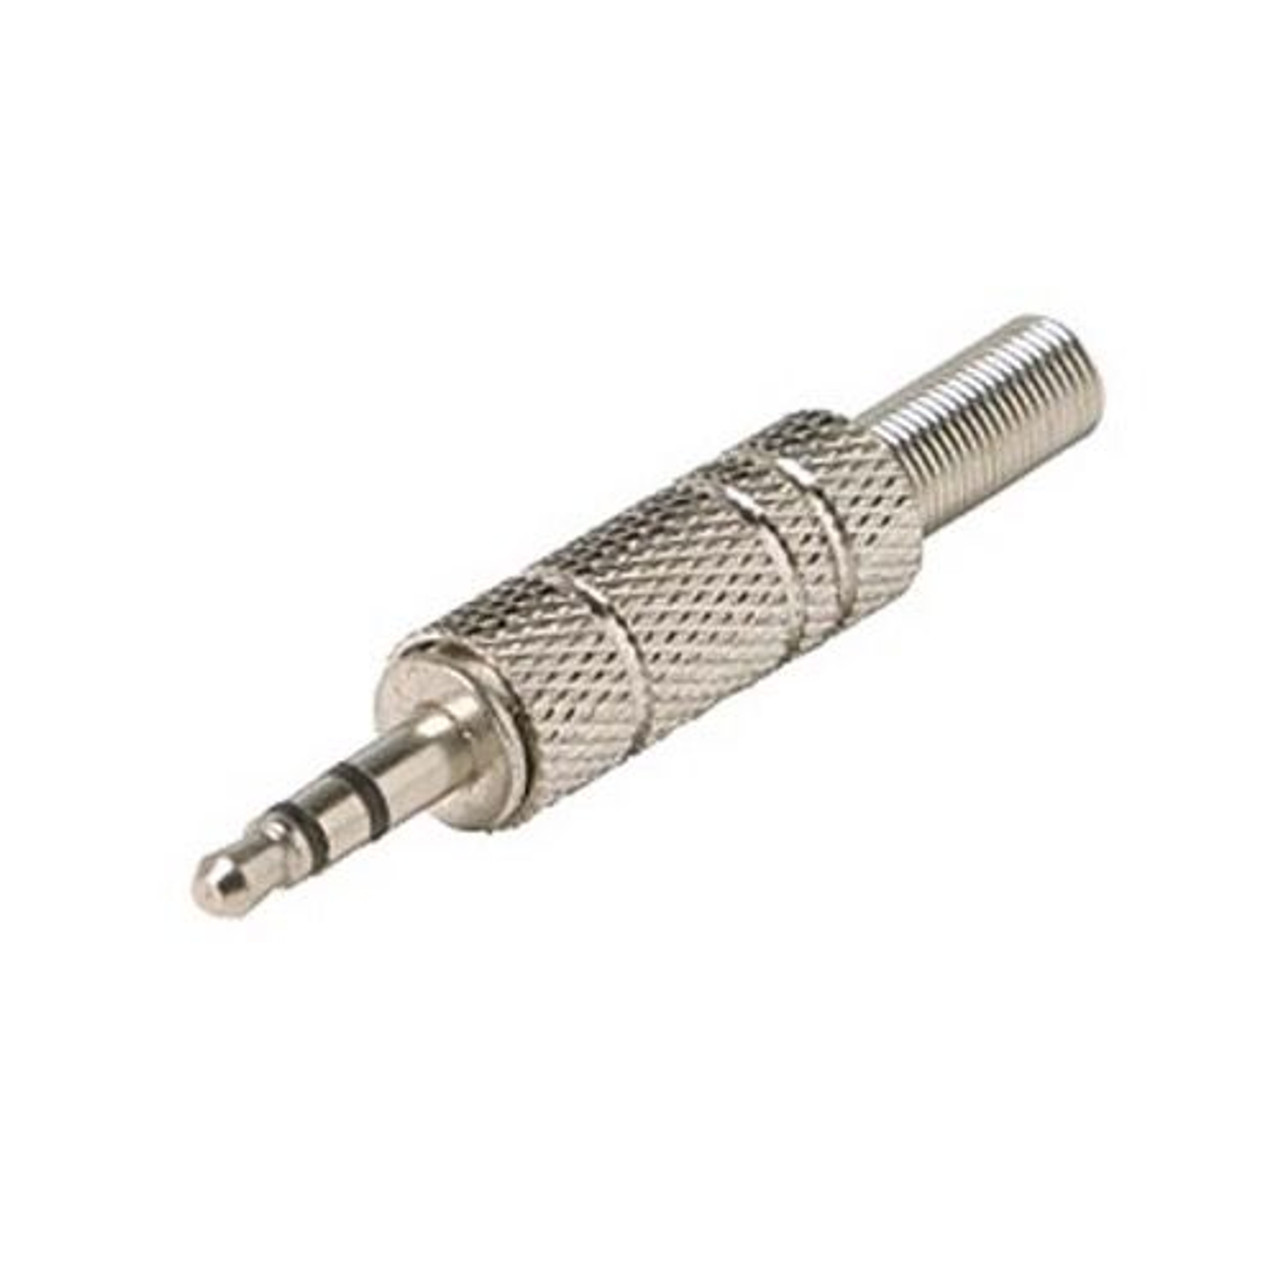 Steren 250-150 3.5mm Male Plug Connector Audio Spring Relief Nickel Plate, Part # 250150